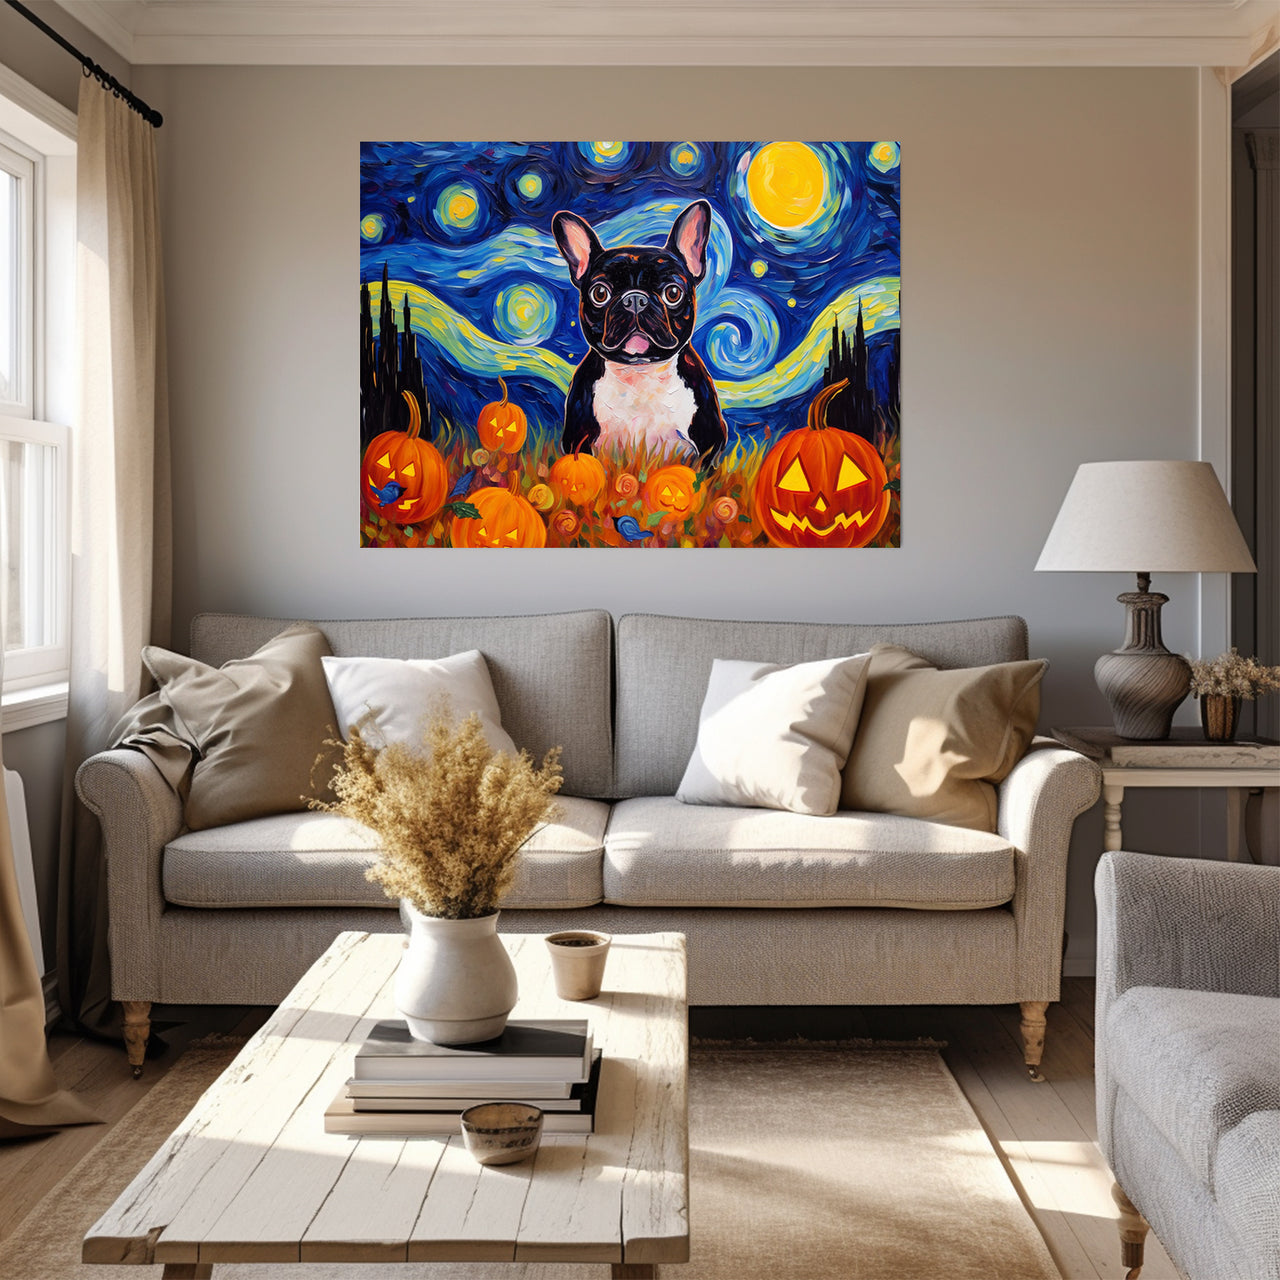 French Bulldog 02 Halloween With Pumpkin Oil Painting Van Goh Style, Wooden Canvas Prints Wall Art Painting , Canvas 3d Art